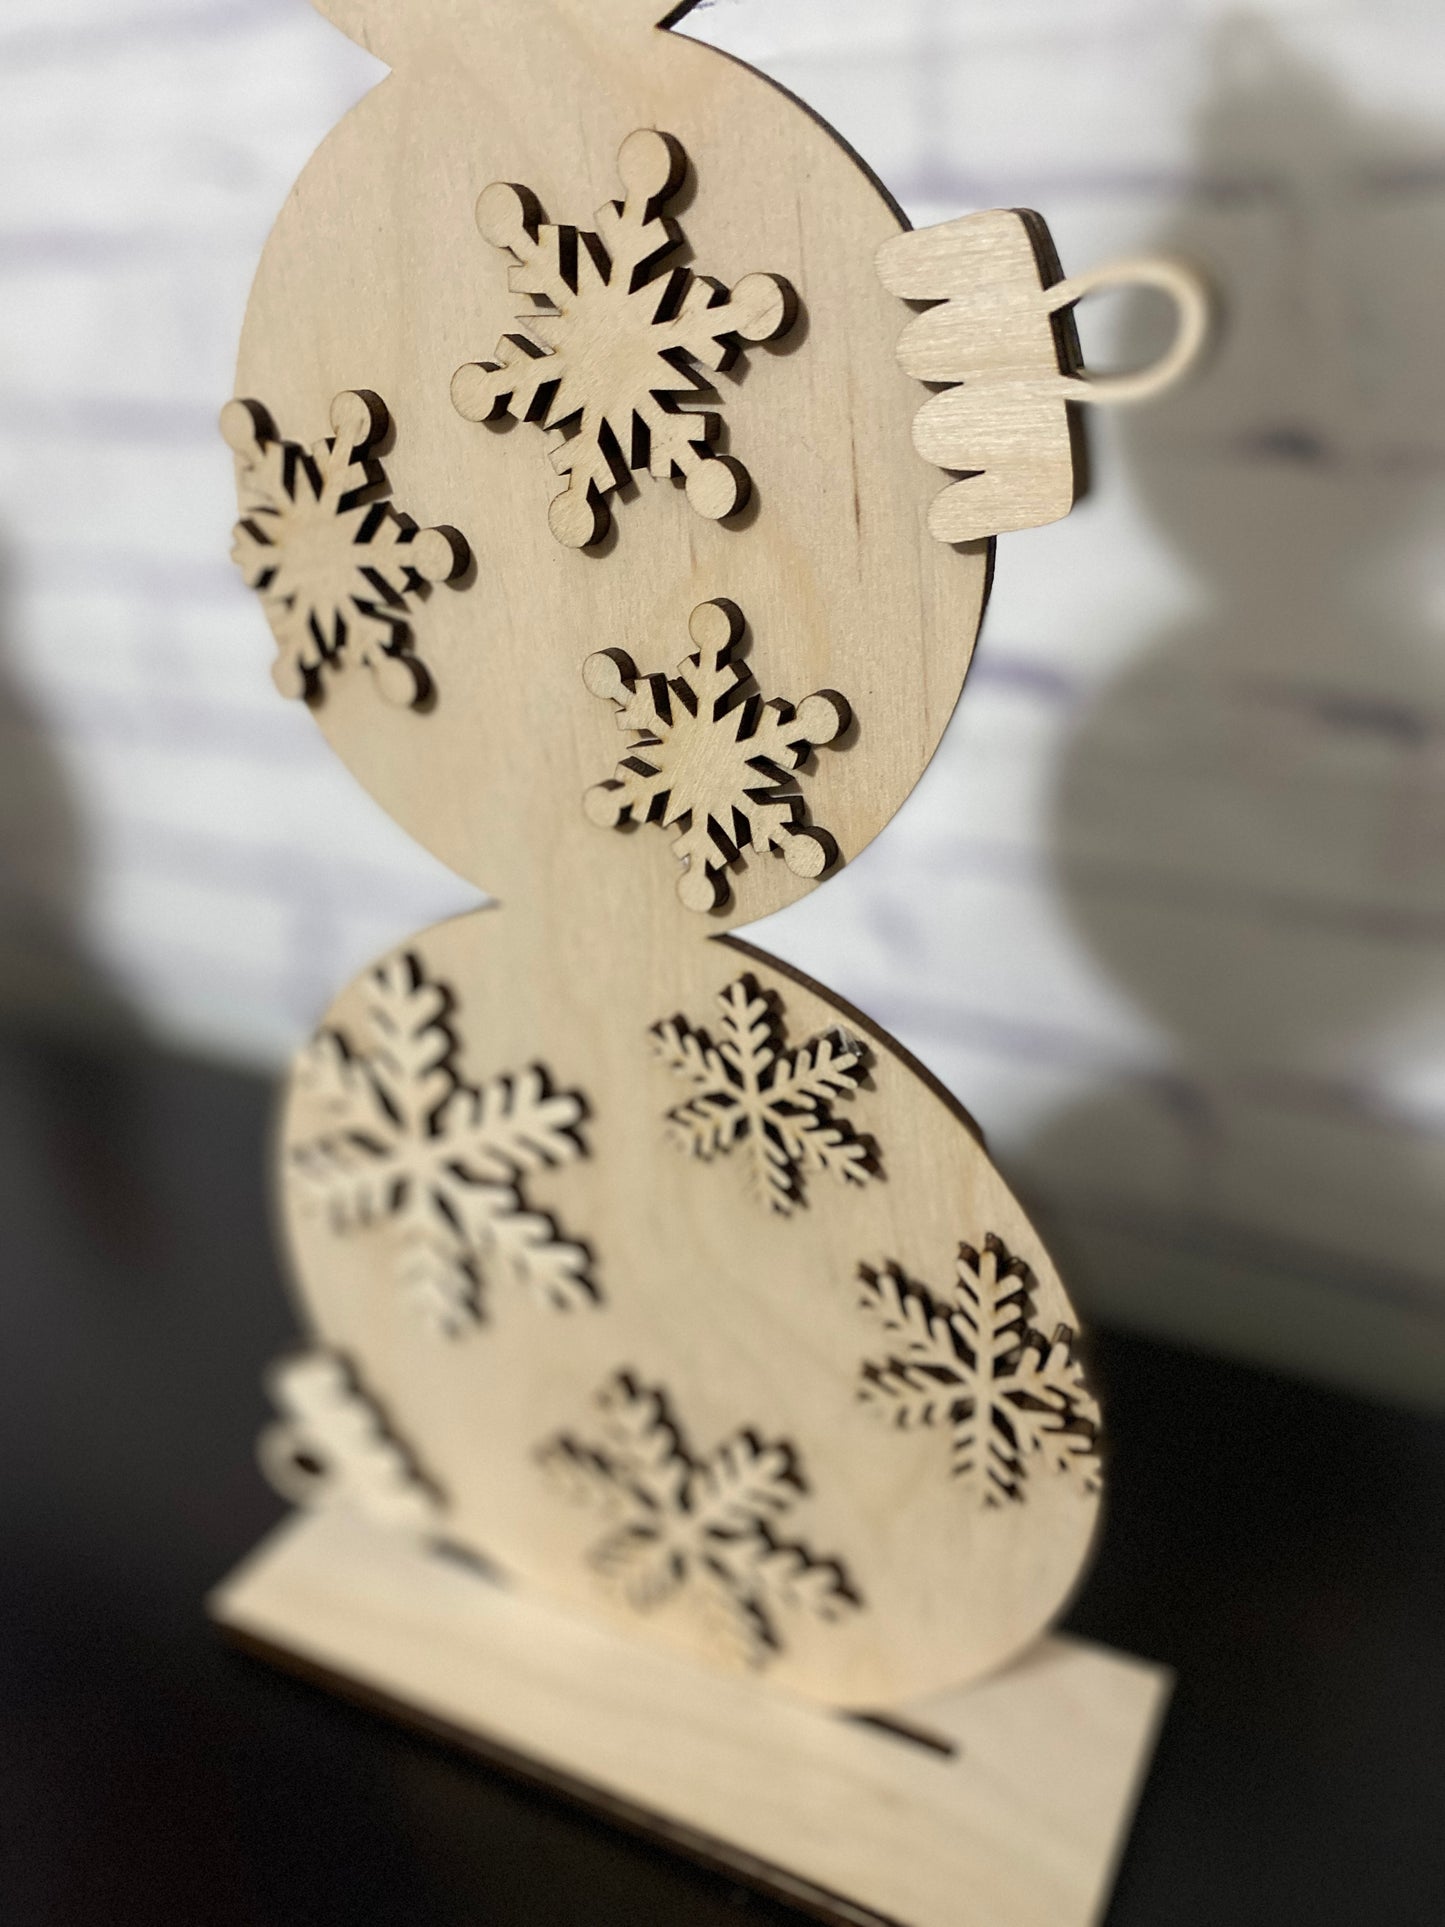 Stacked Ornaments / Ornament Topiary / Christmas Decor Laser Cut Wooden Blank